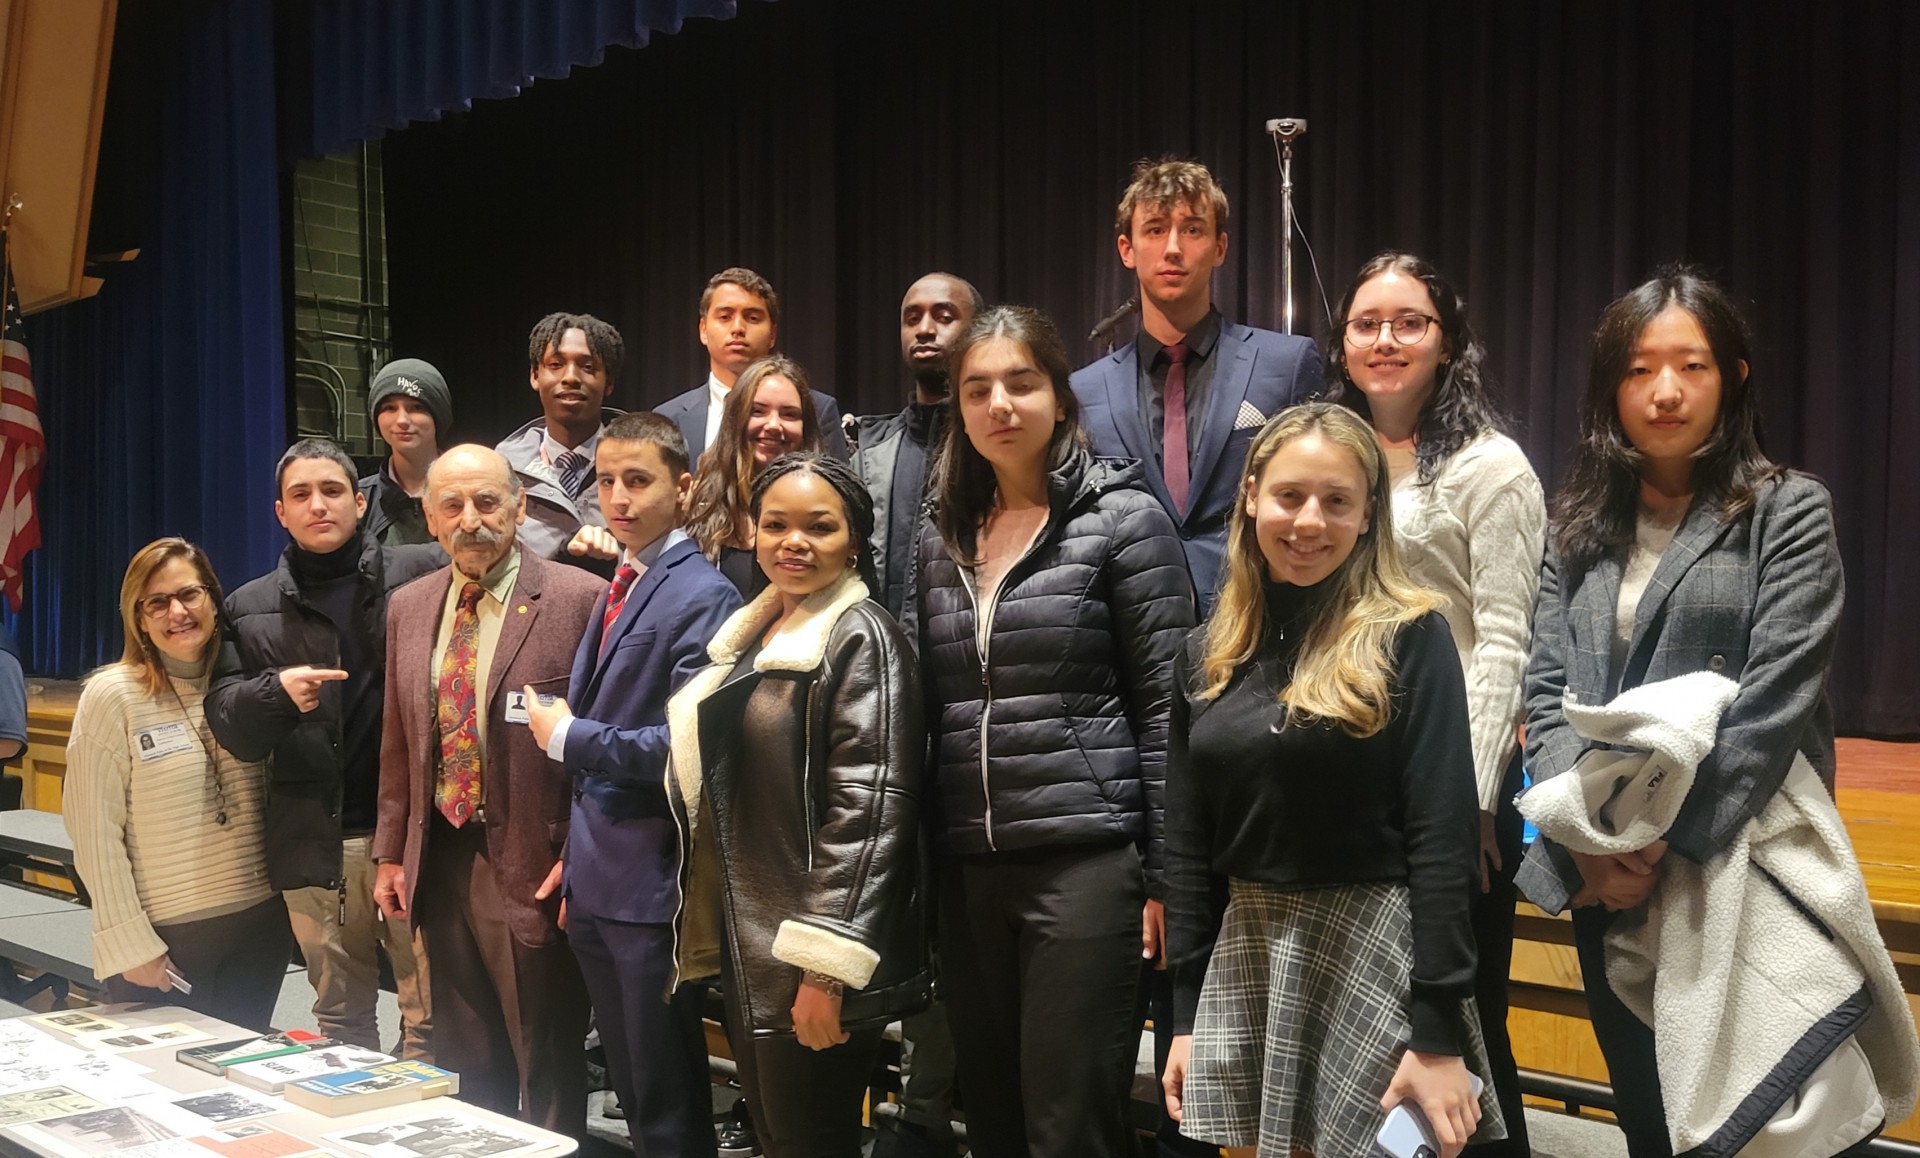 Hoosac Students Meet Holocaust Survivor Ivan Vamos and Learn First Hand About Courage and Resiliency